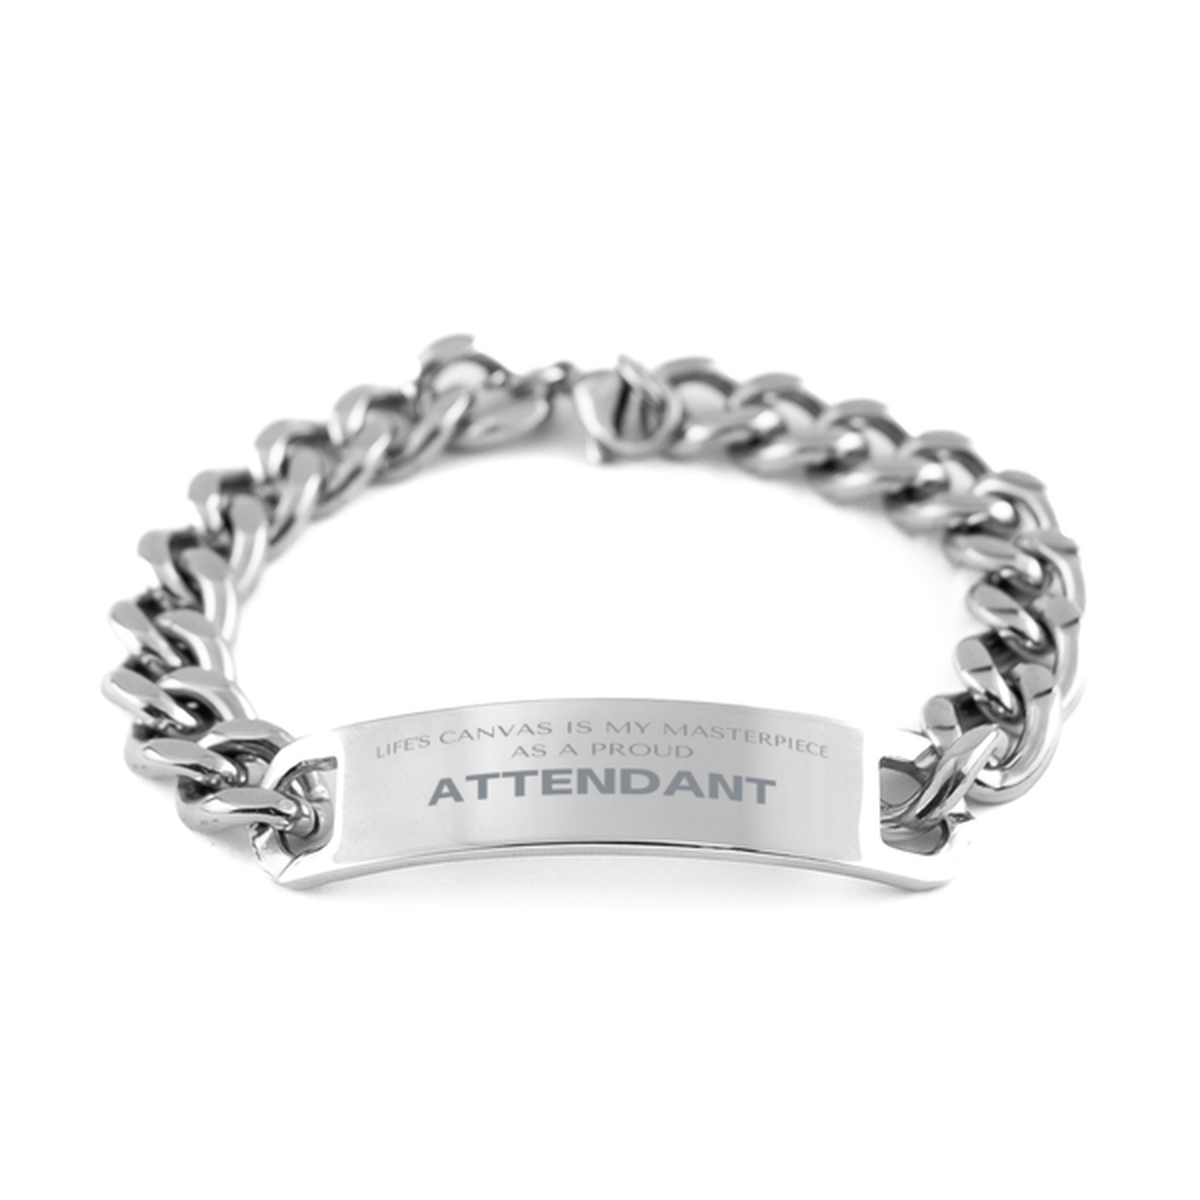 Proud Attendant Gifts, Life's canvas is my masterpiece, Epic Birthday Christmas Unique Cuban Chain Stainless Steel Bracelet For Attendant, Coworkers, Men, Women, Friends